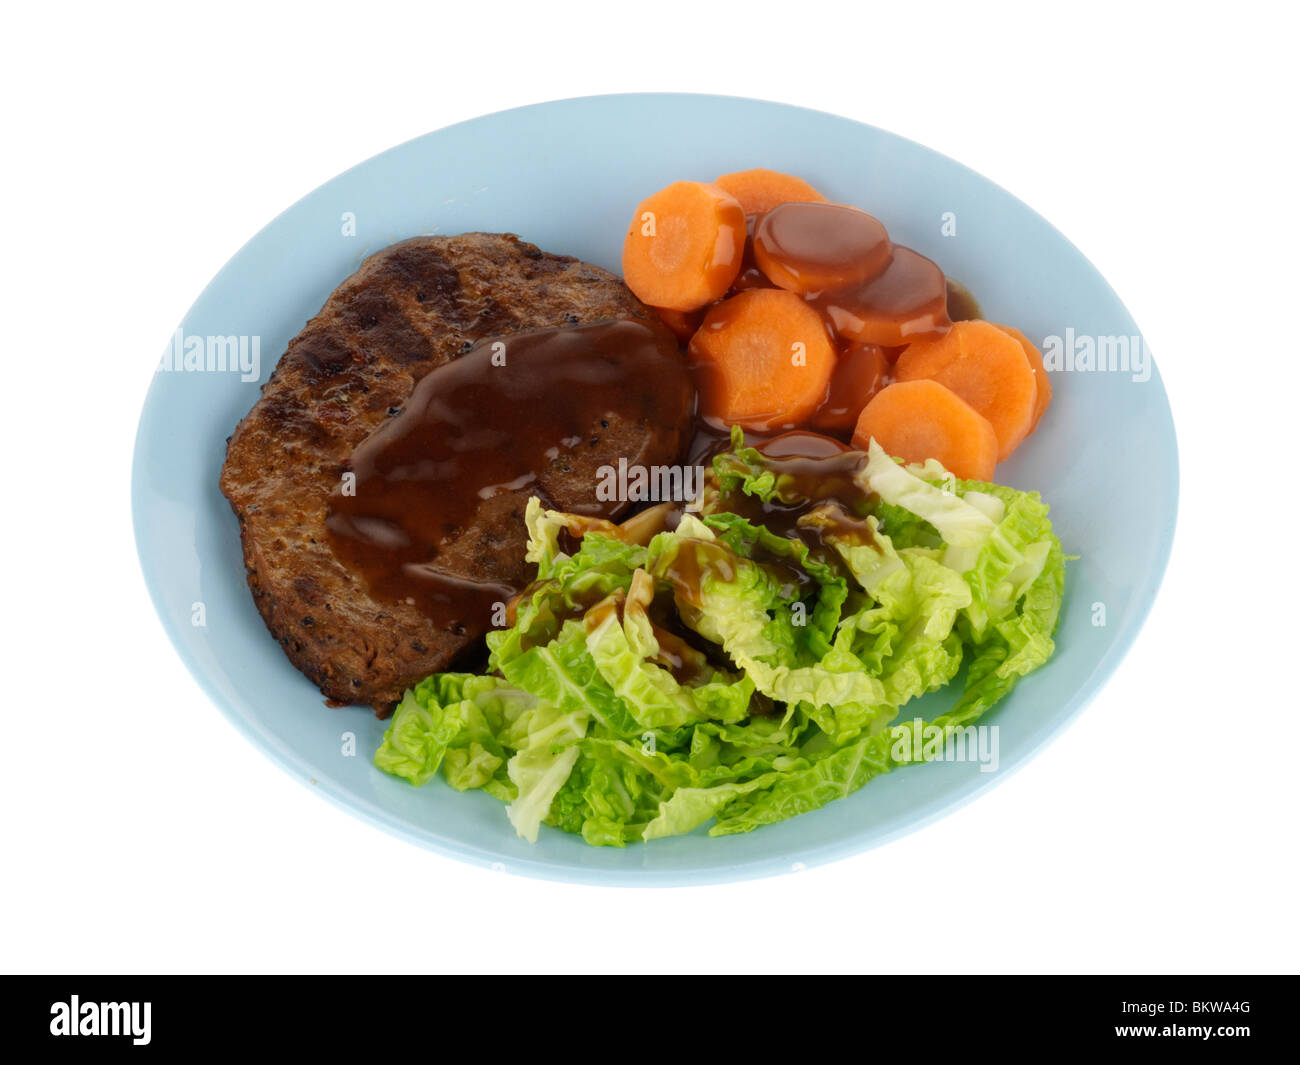 Vegetarian Steak with Cabbage and Carrots Stock Photo